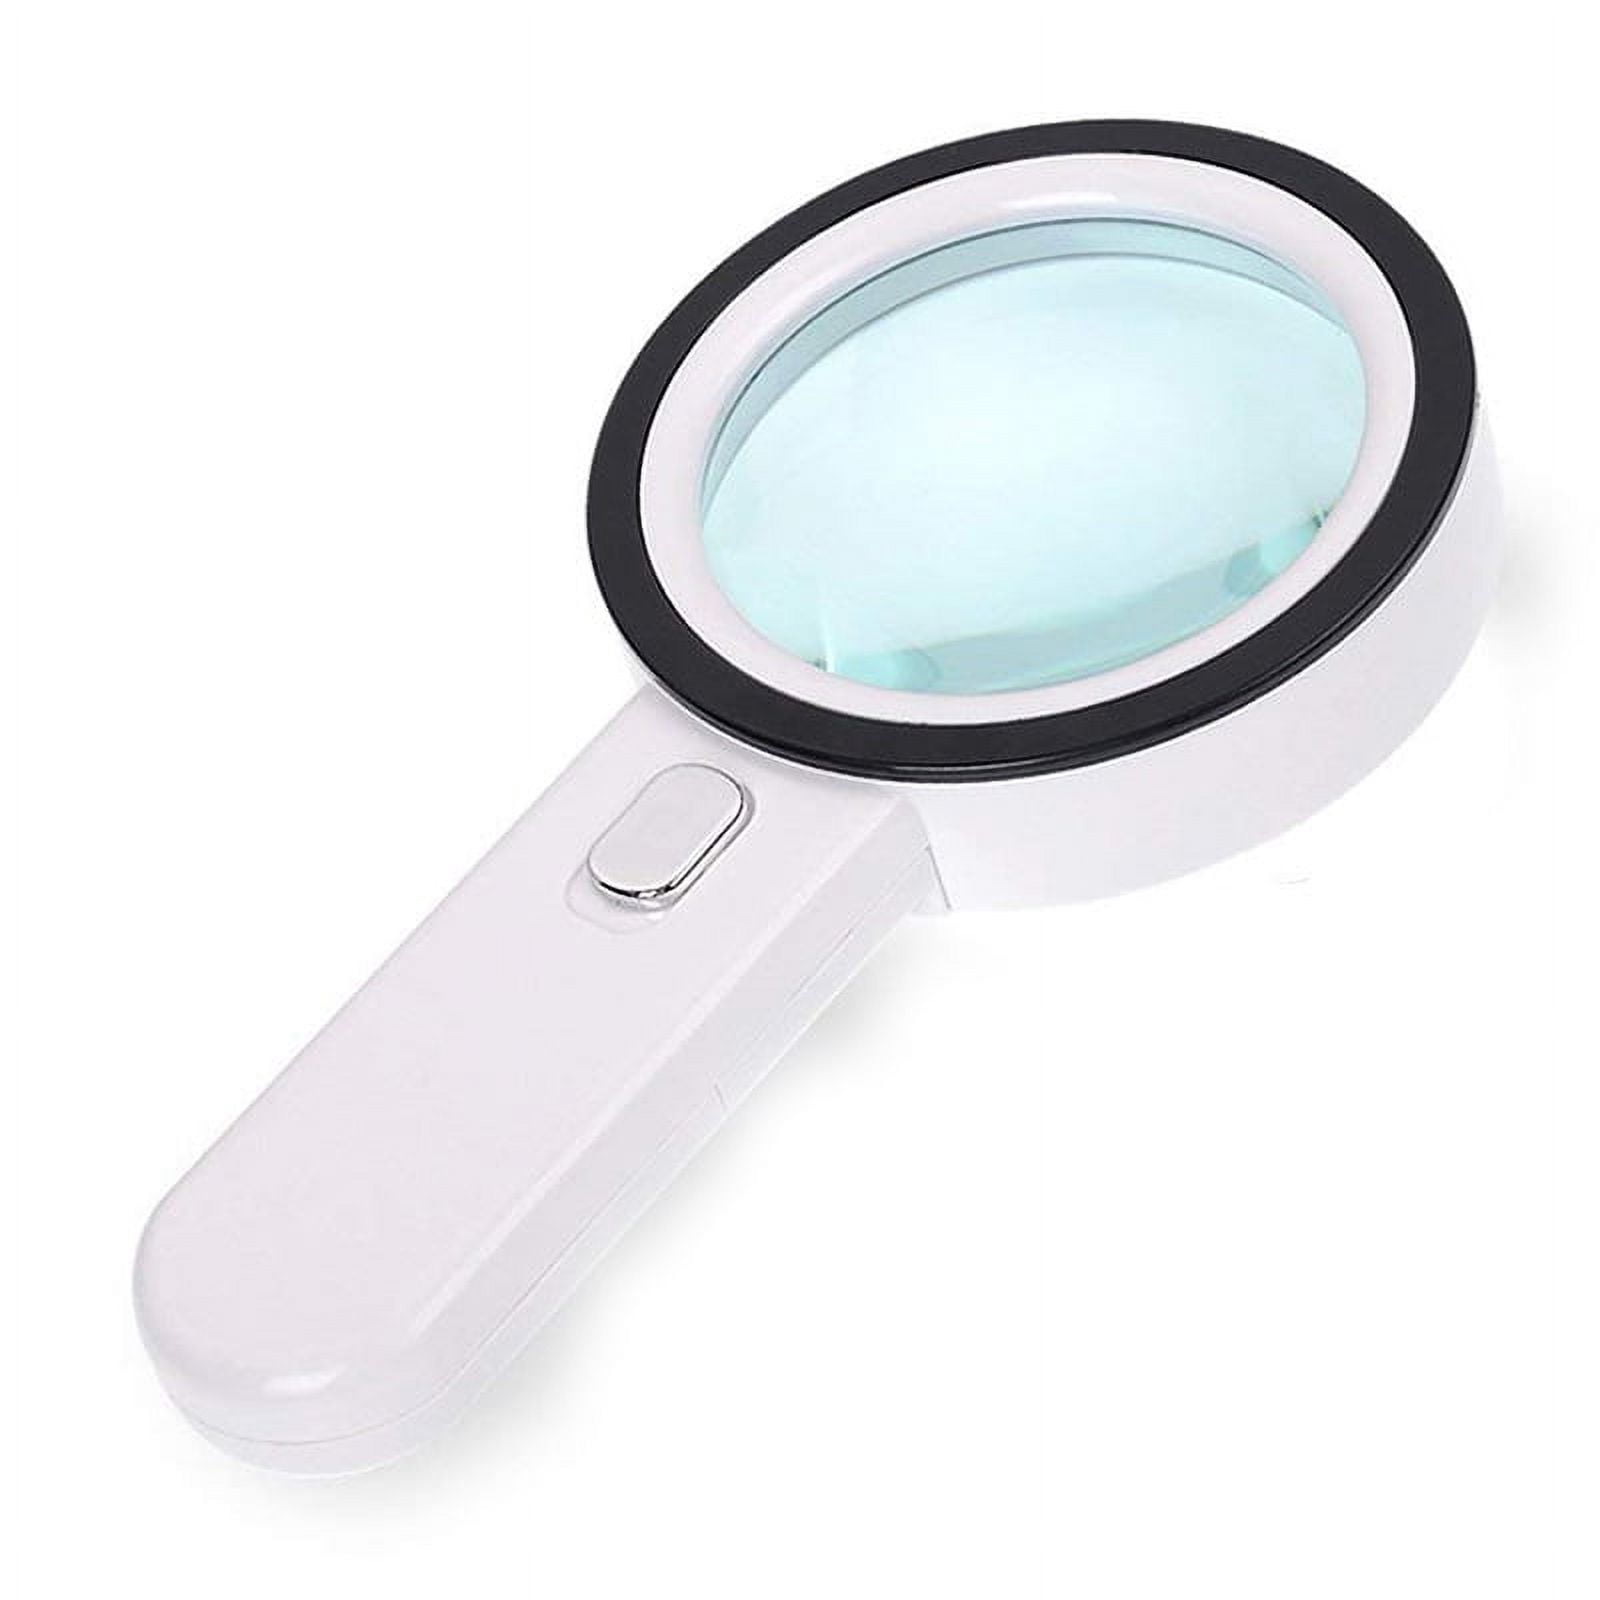 Magnifying Glass 20X, Magnifier with Light, LED Illuminated Handheld,  Premium High Magnifying Glass for Reading Books, Seniors, Macular  Degeneration, 